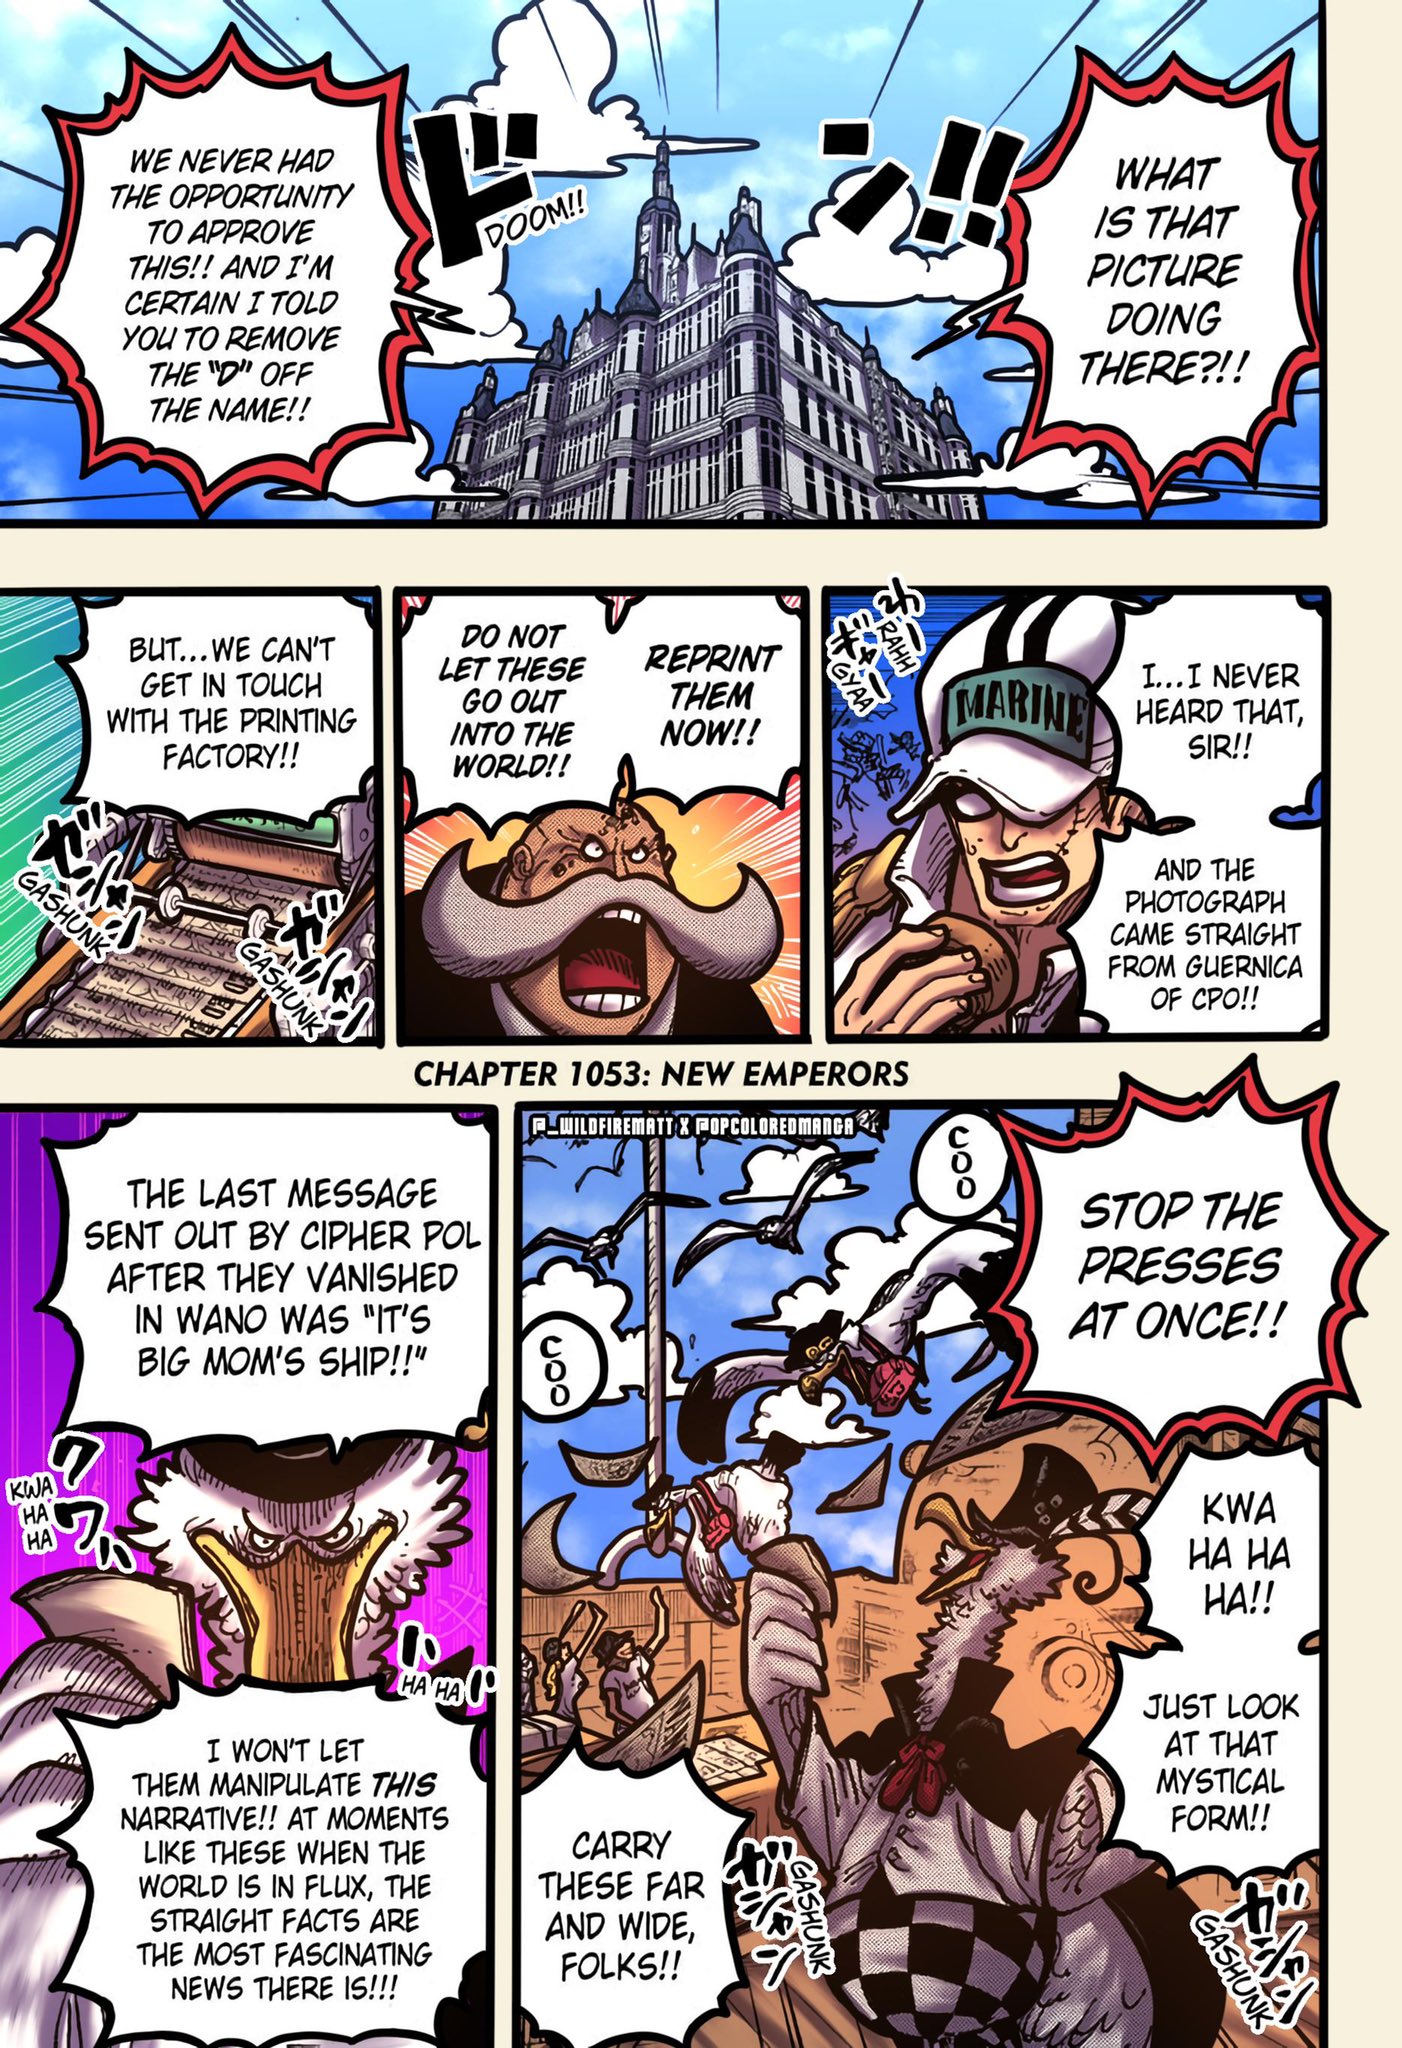 We colored One Piece Chapter 1,000 in FULL COLOR!! (Link in